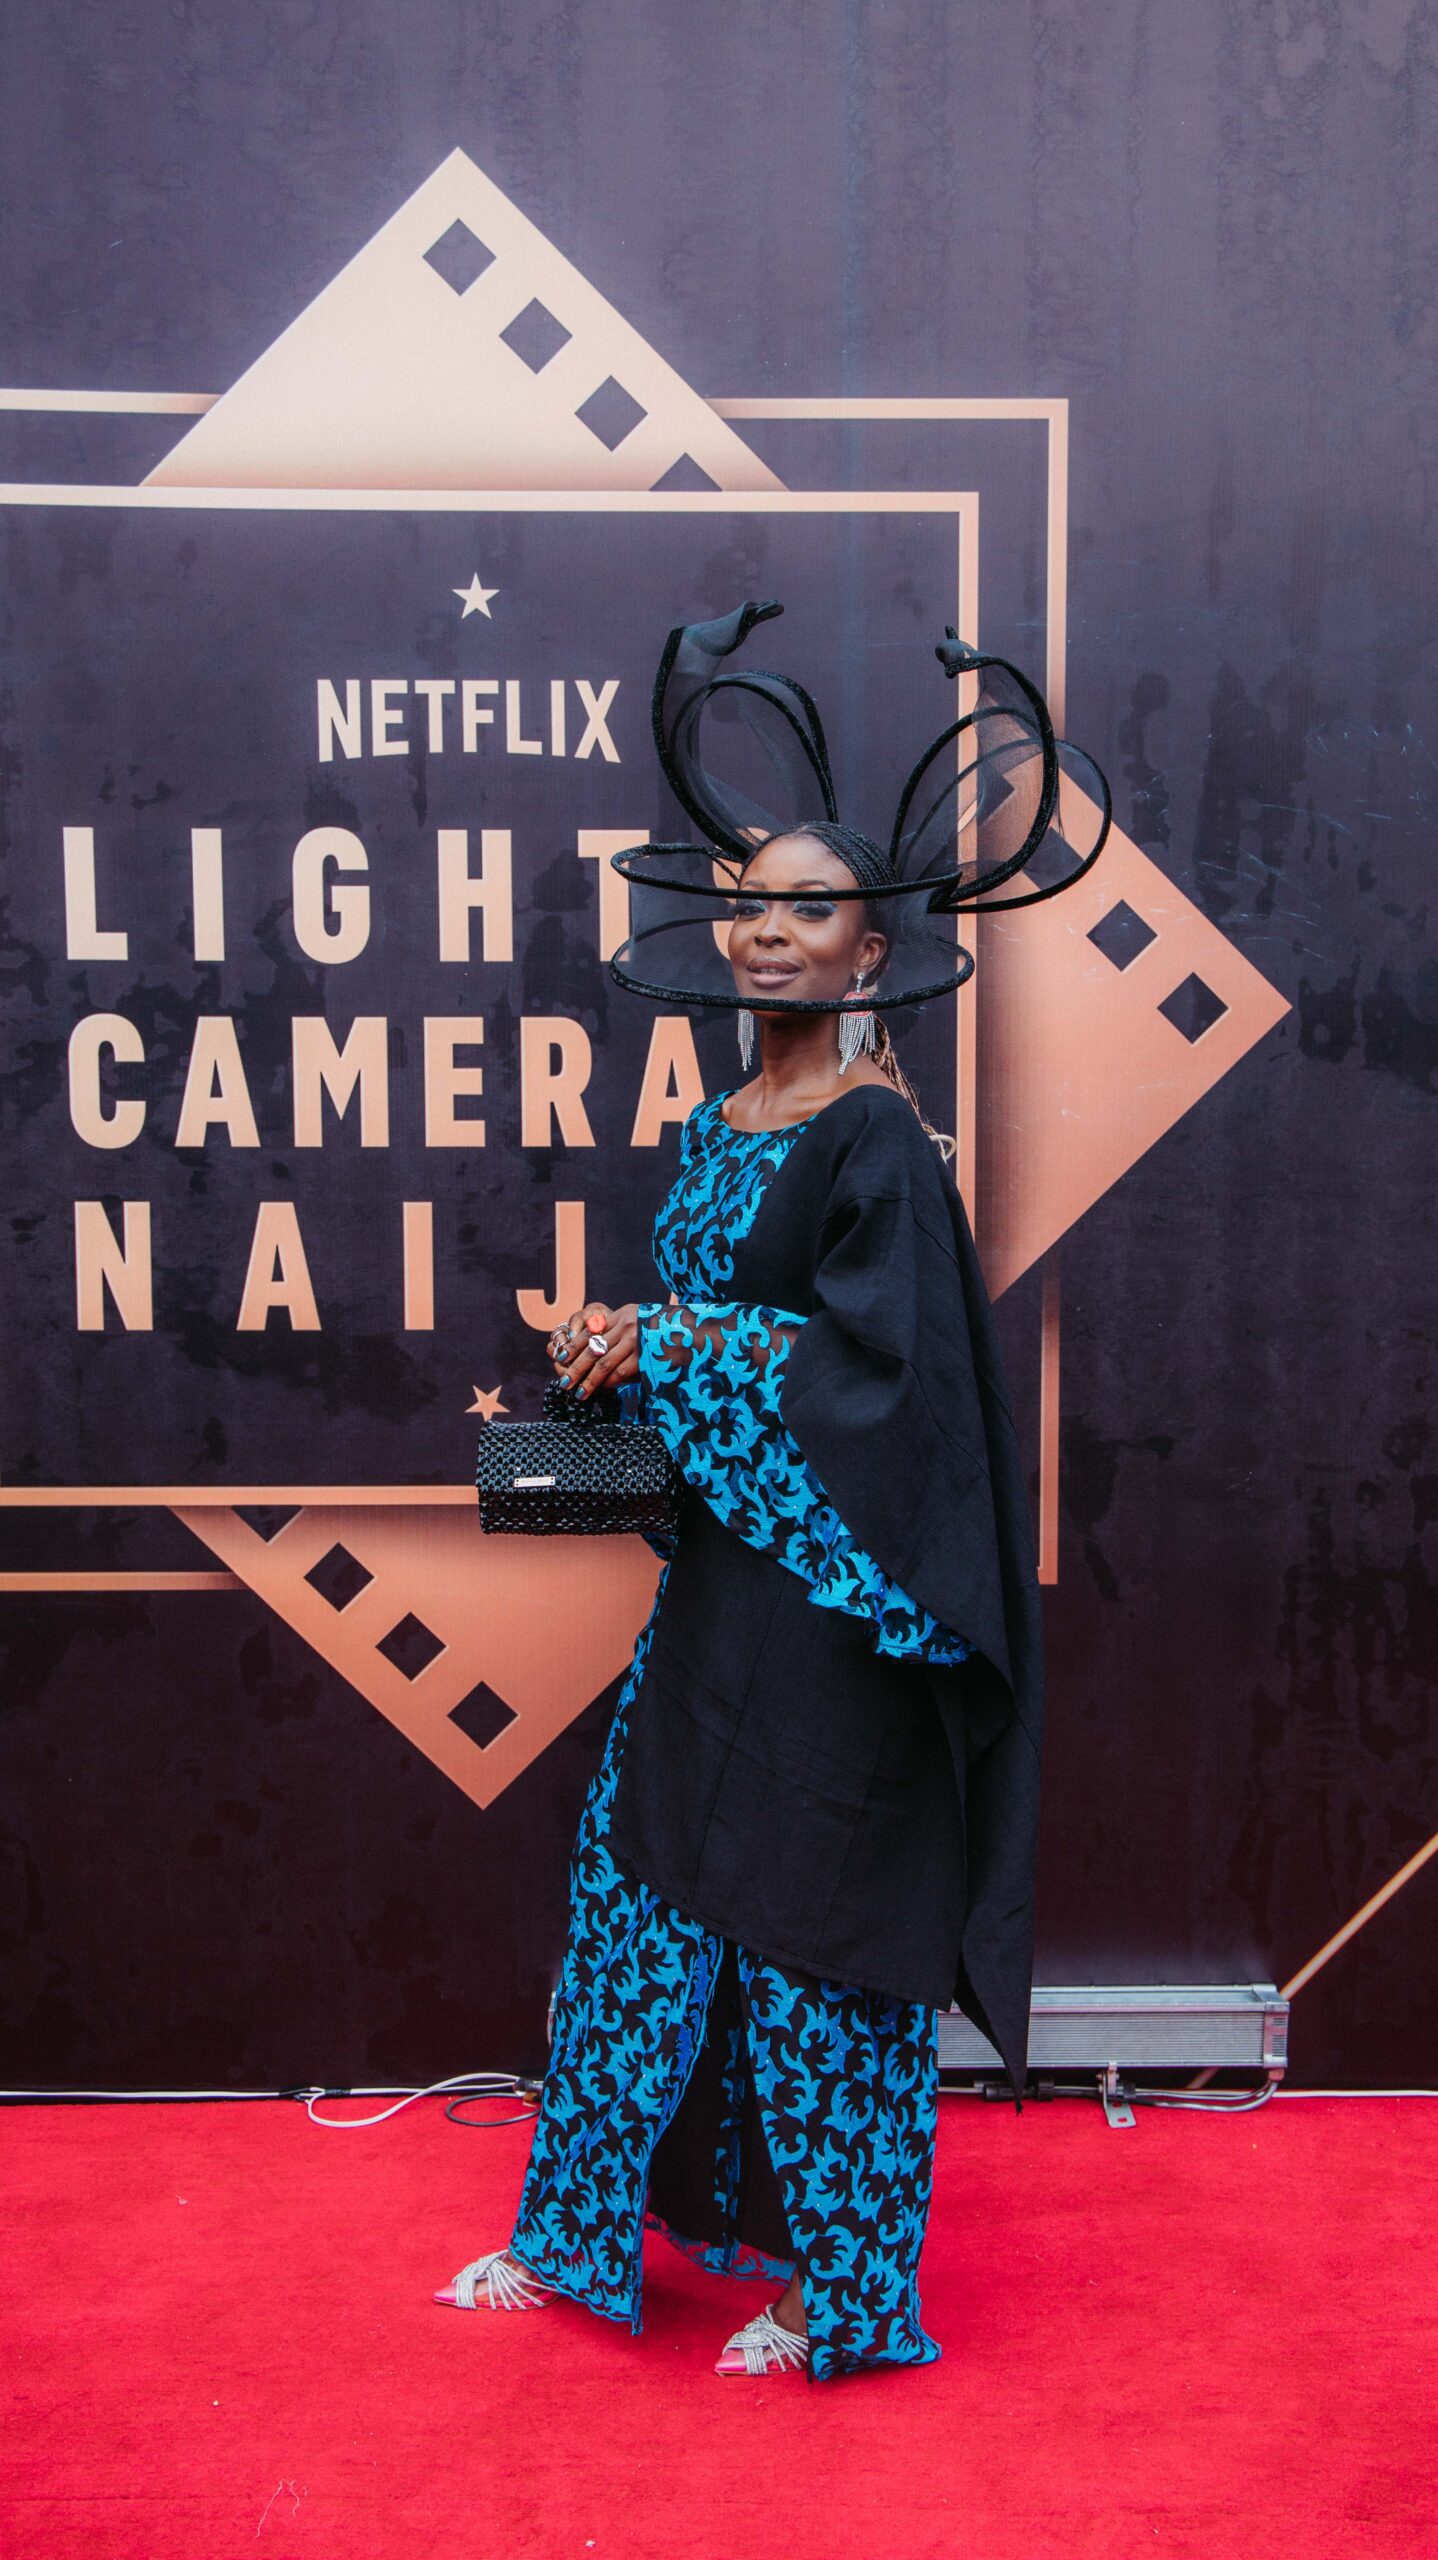 RED CARPET 355 scaled - Red Carpet Photos From Netflix's "Lights, Action, Naija!"